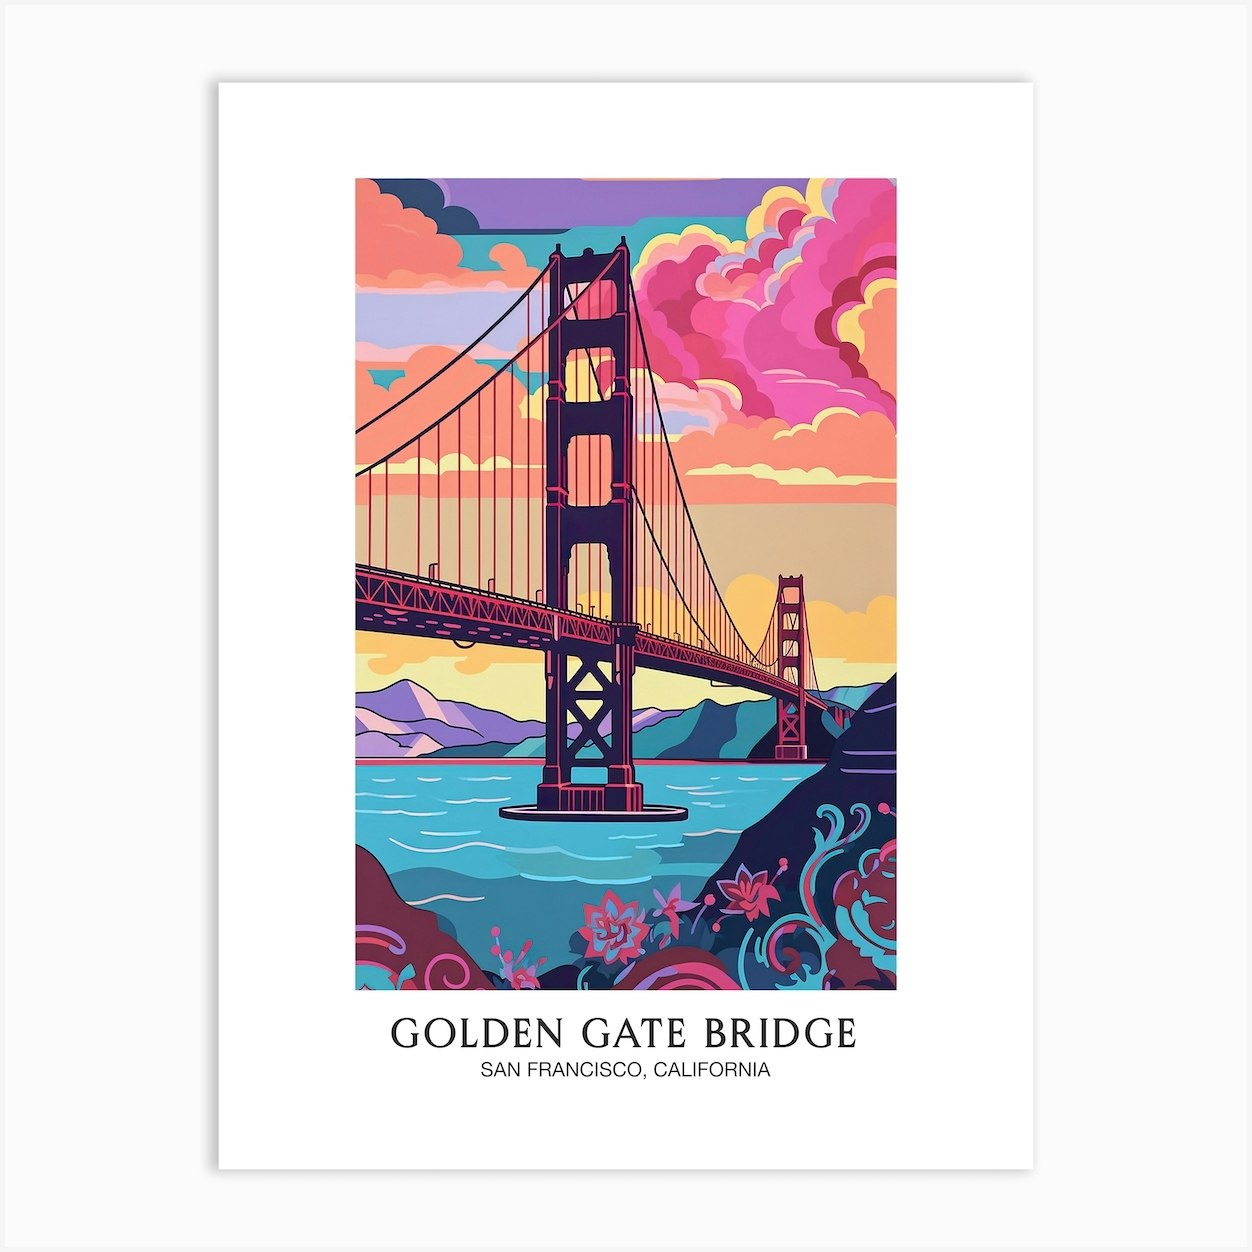 Golden Gate Bridge Art Print Francisco Fy Collection Poster 8 Travel - Colourful San by Travel Poster